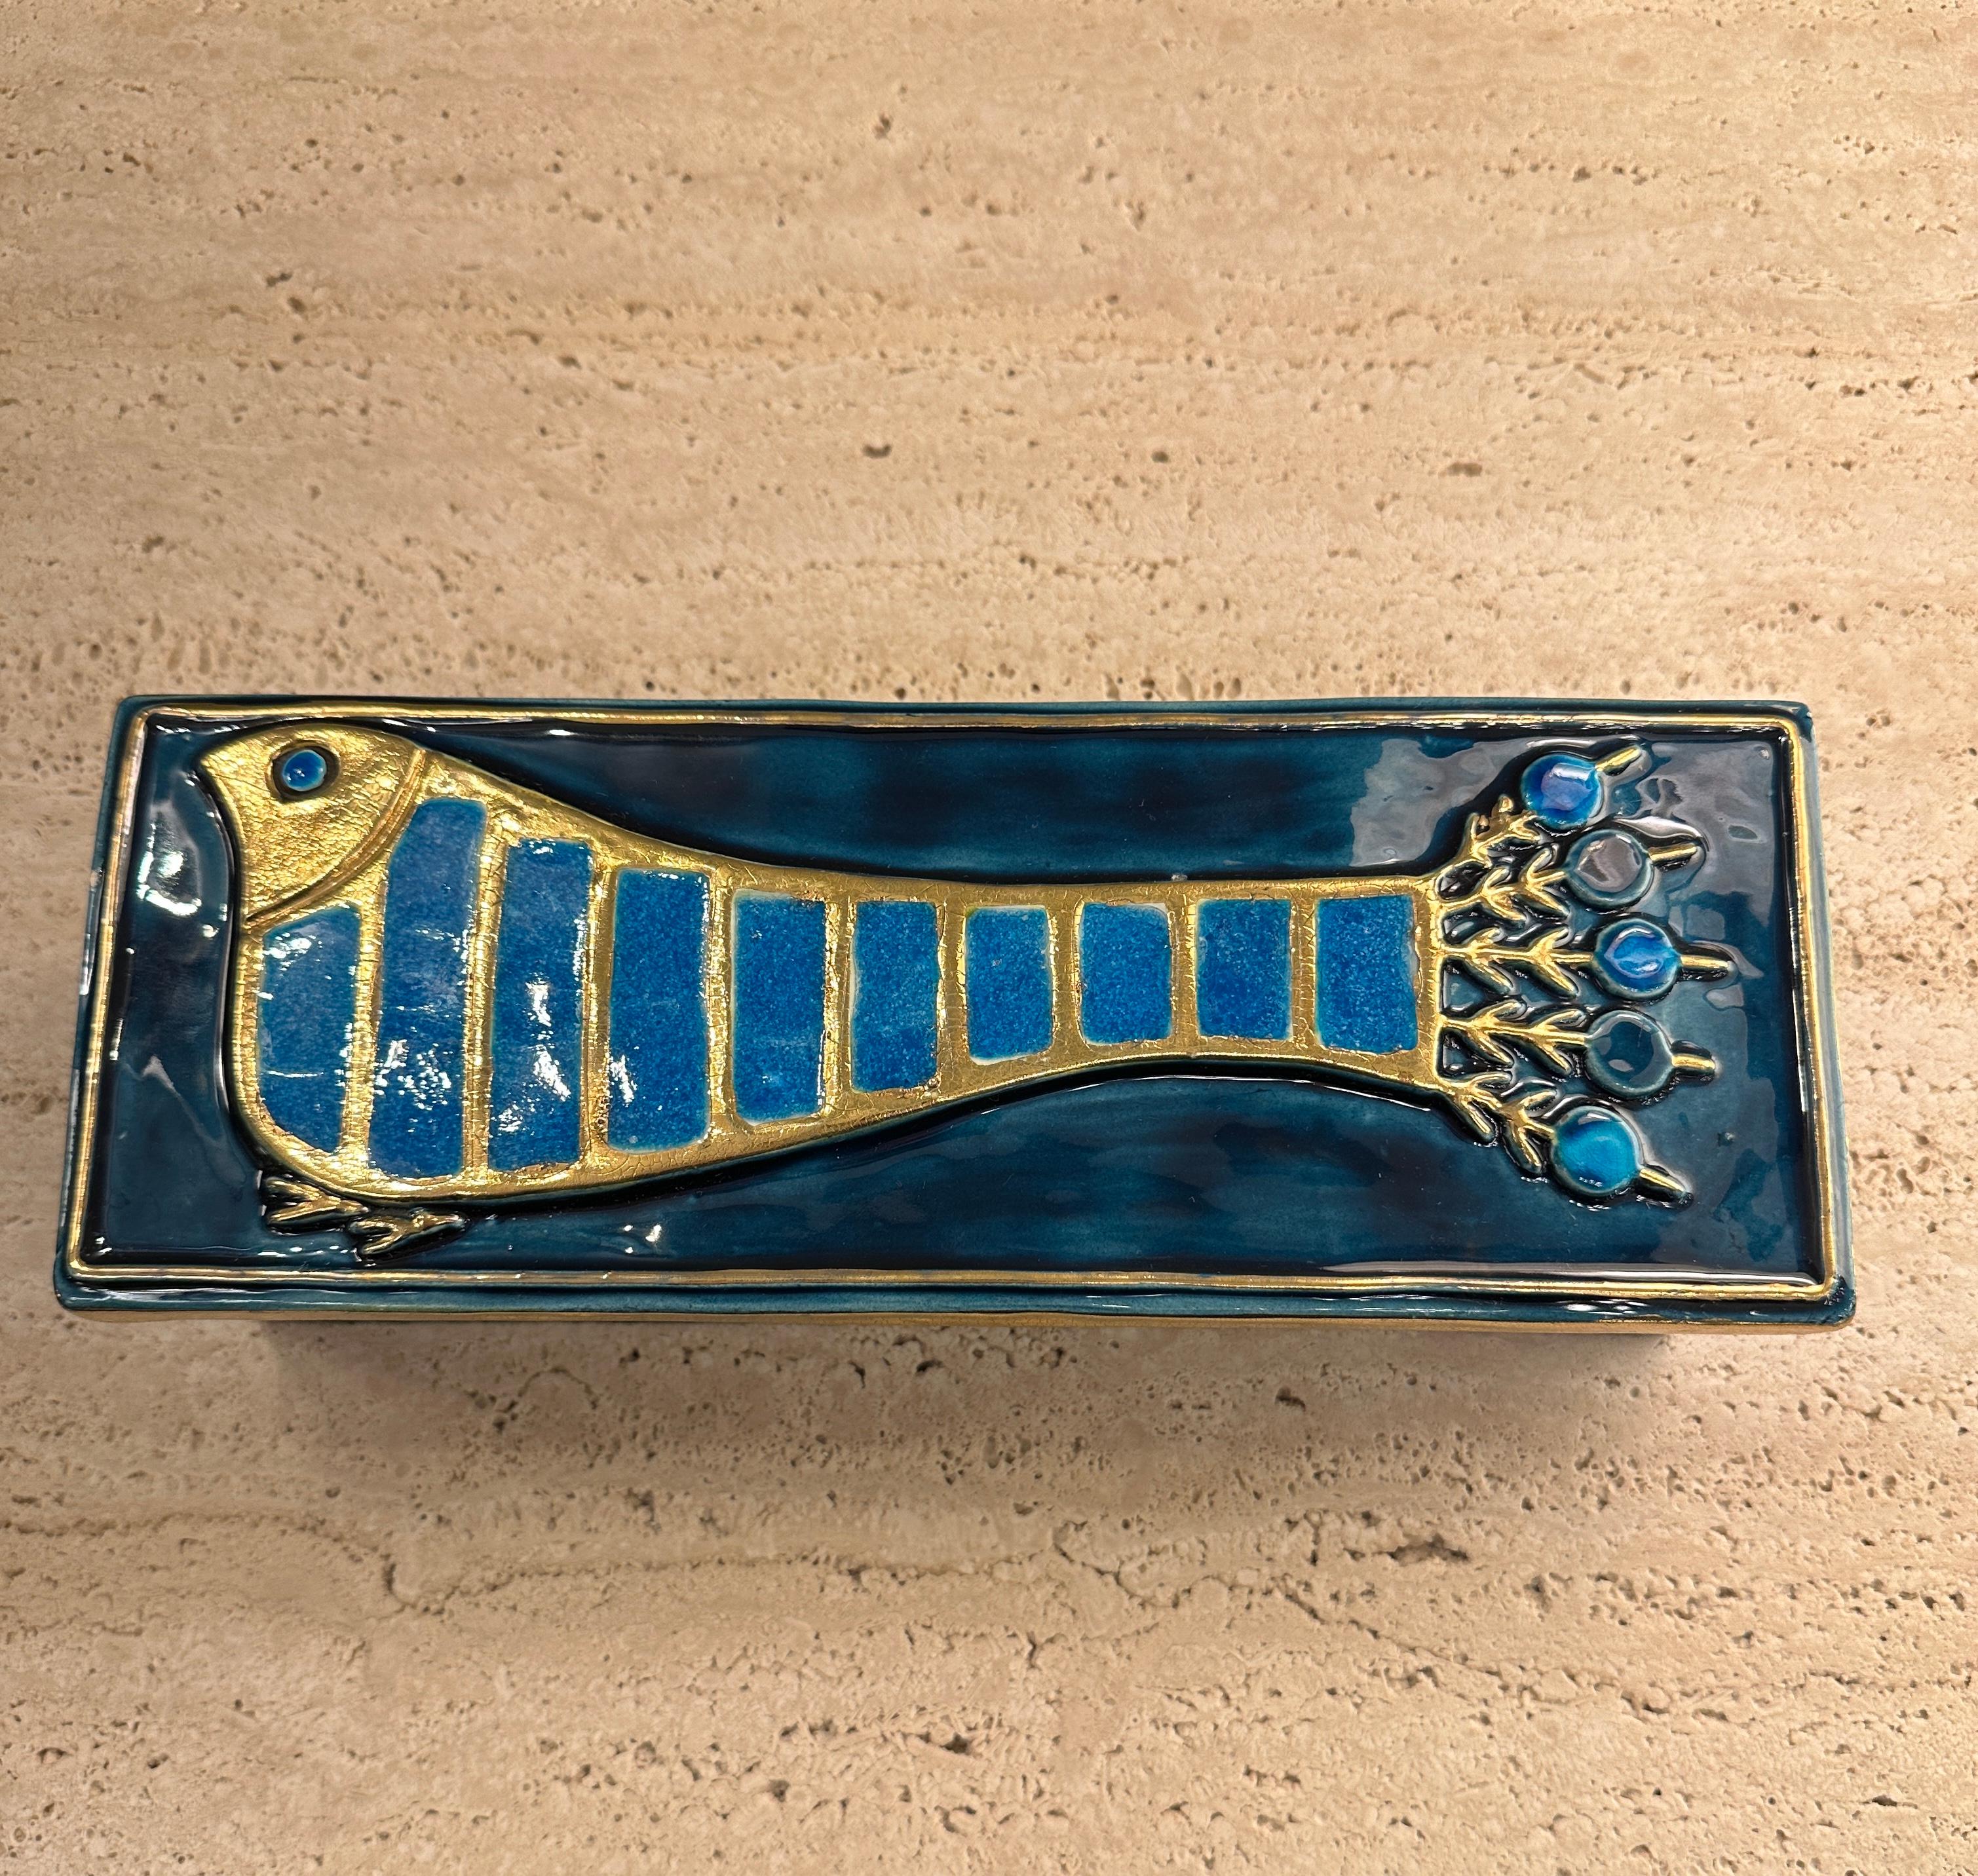 Rectangular wood box topped with an enameled ceramic lid representing a peacock